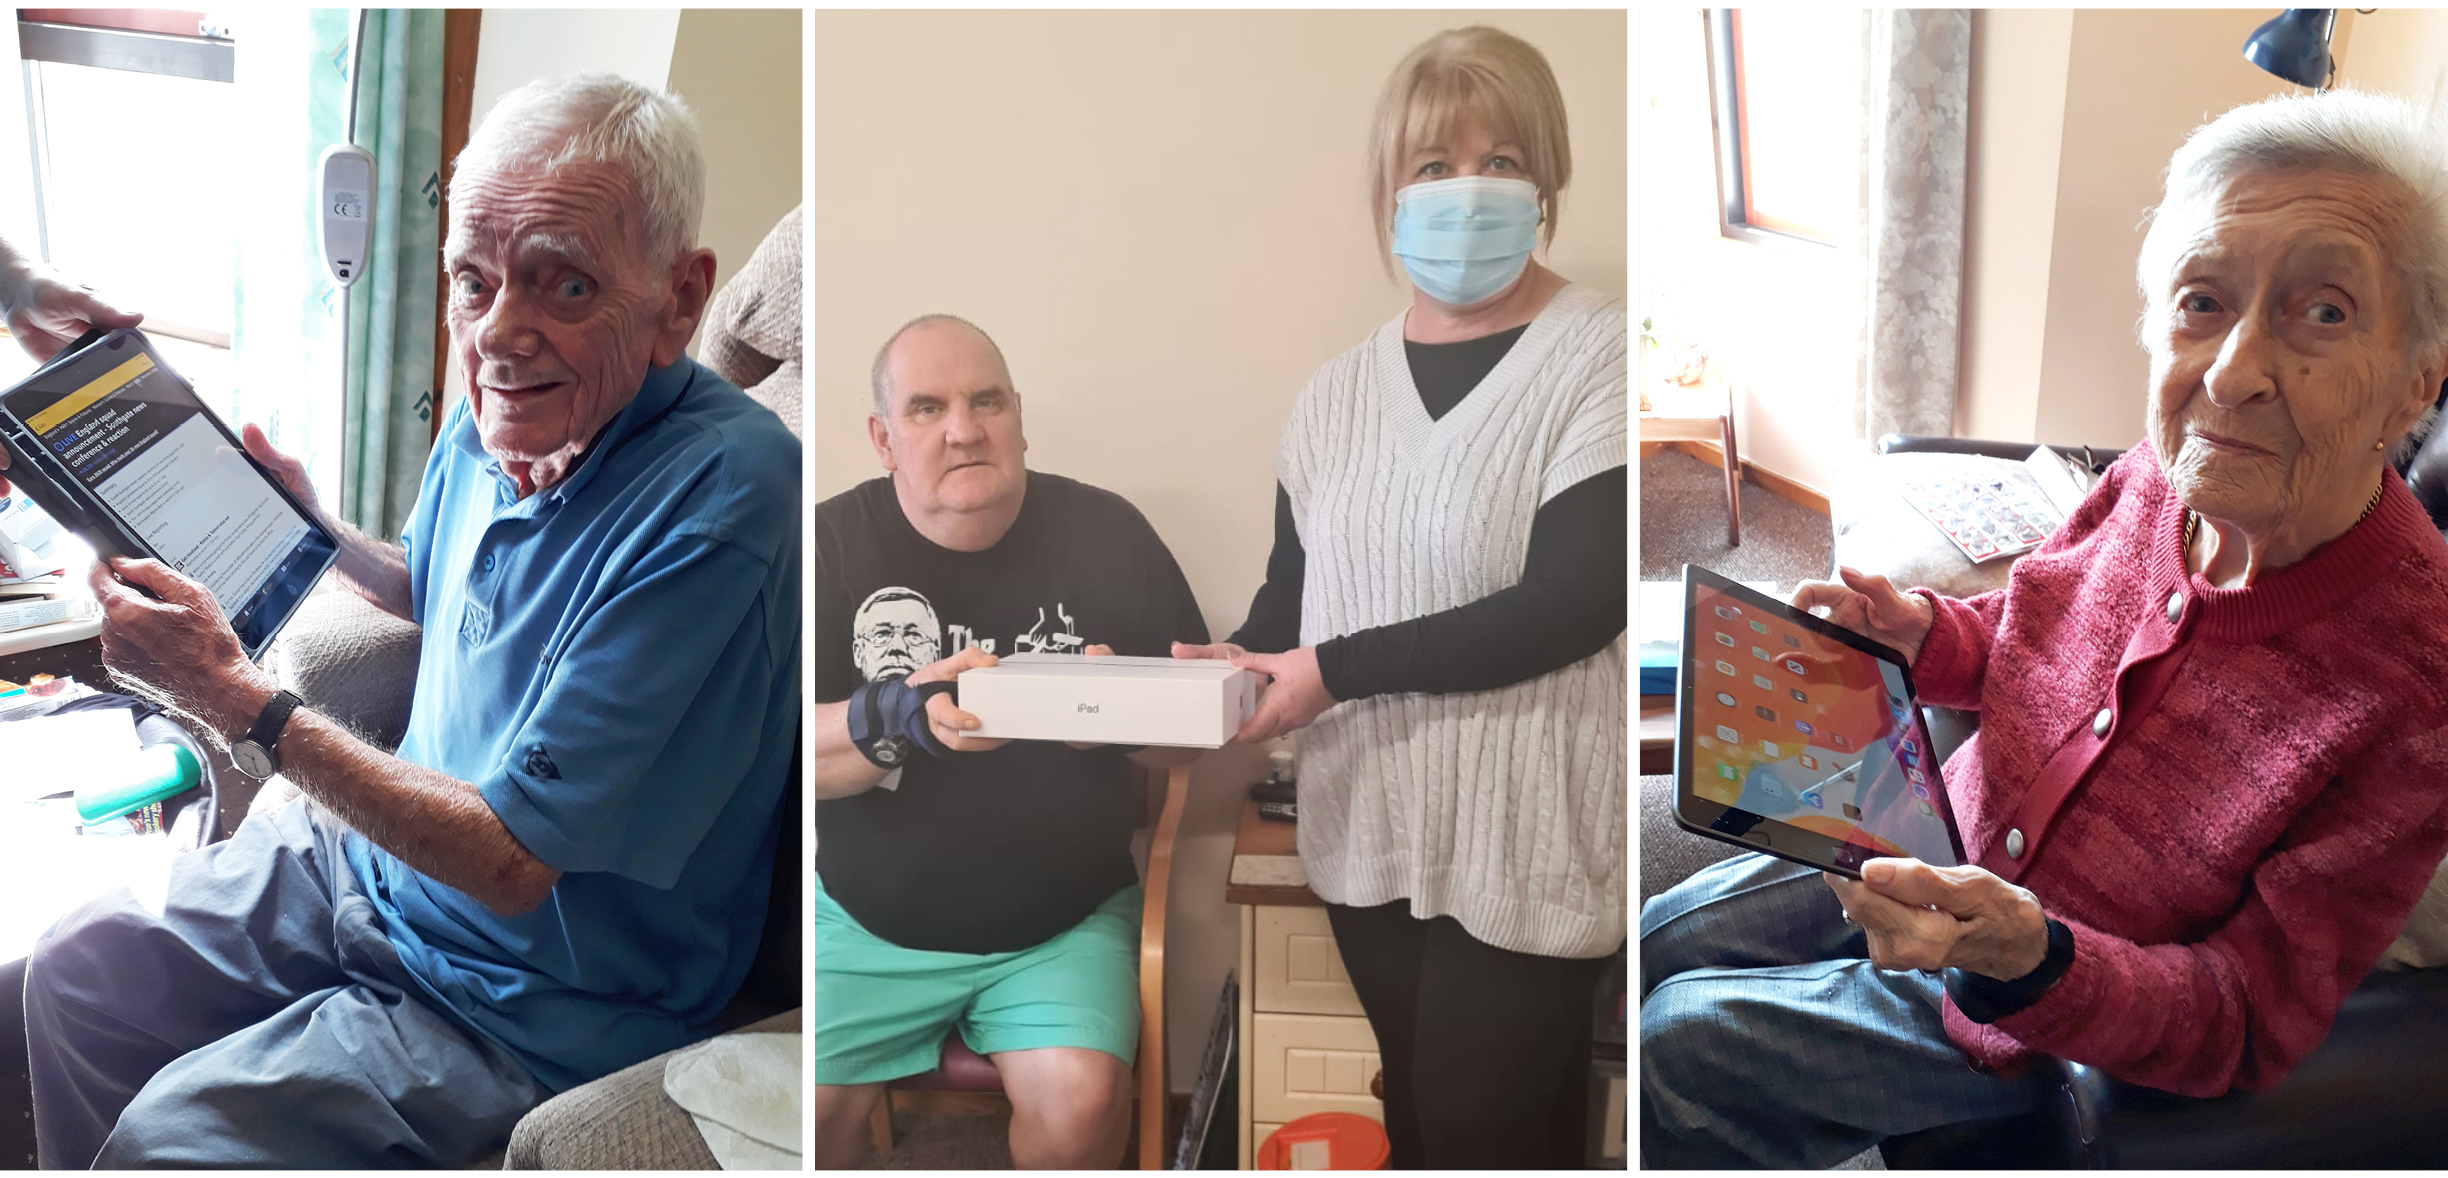 Digital device scheme reduces social isolation among vulnerable people in Tayside